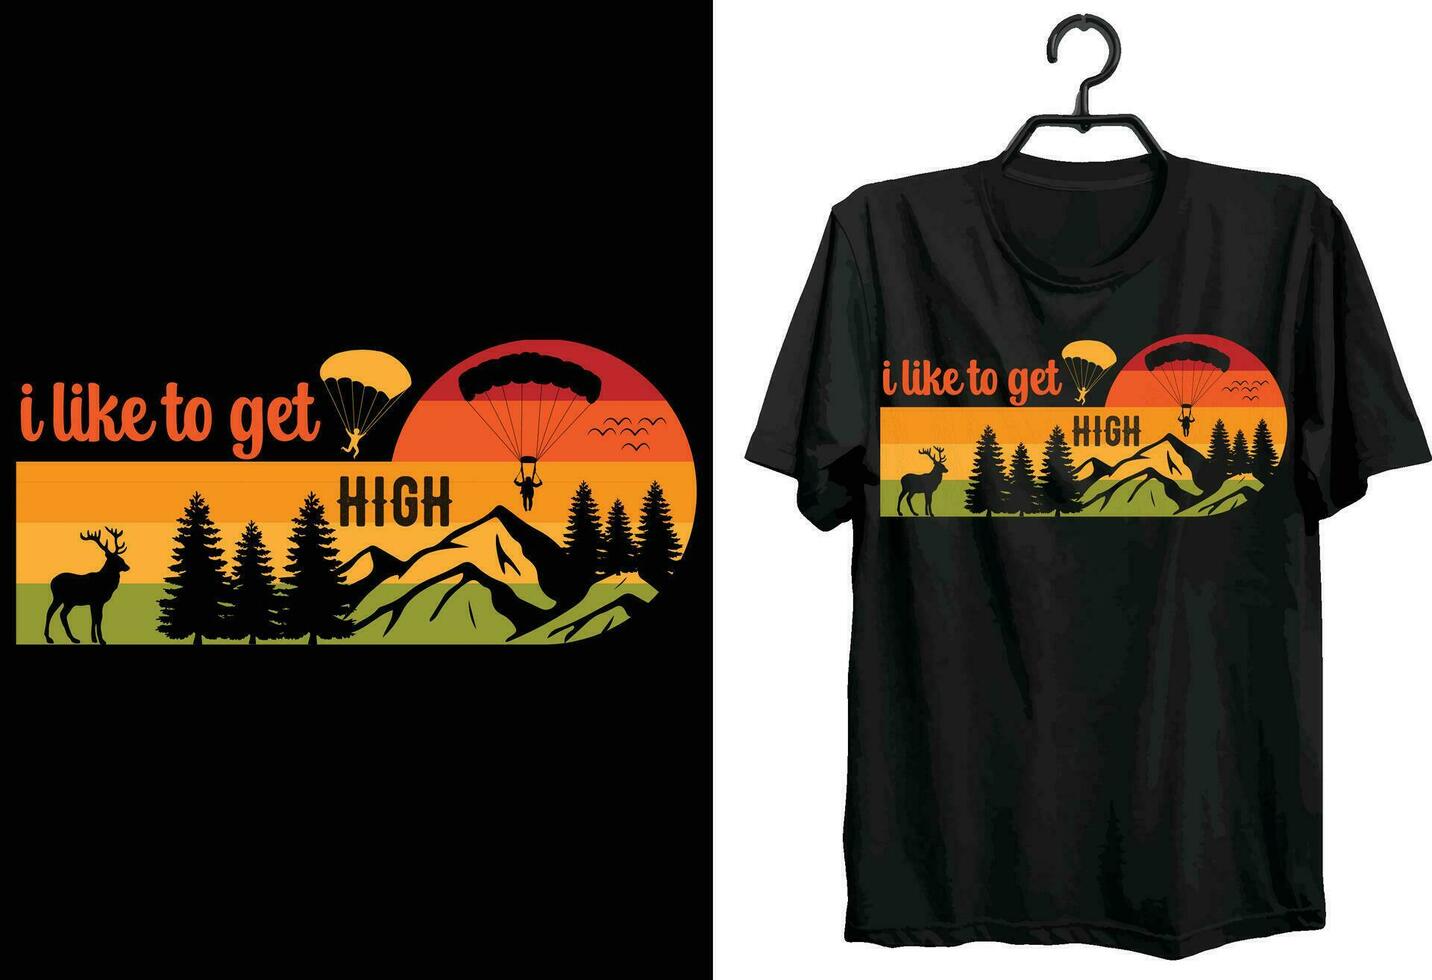 I Like To Get High. Sky Diving T-shirt Design. Funny Gift Item Sky Diving T-shirt Design For Sky Diving Lovers. vector